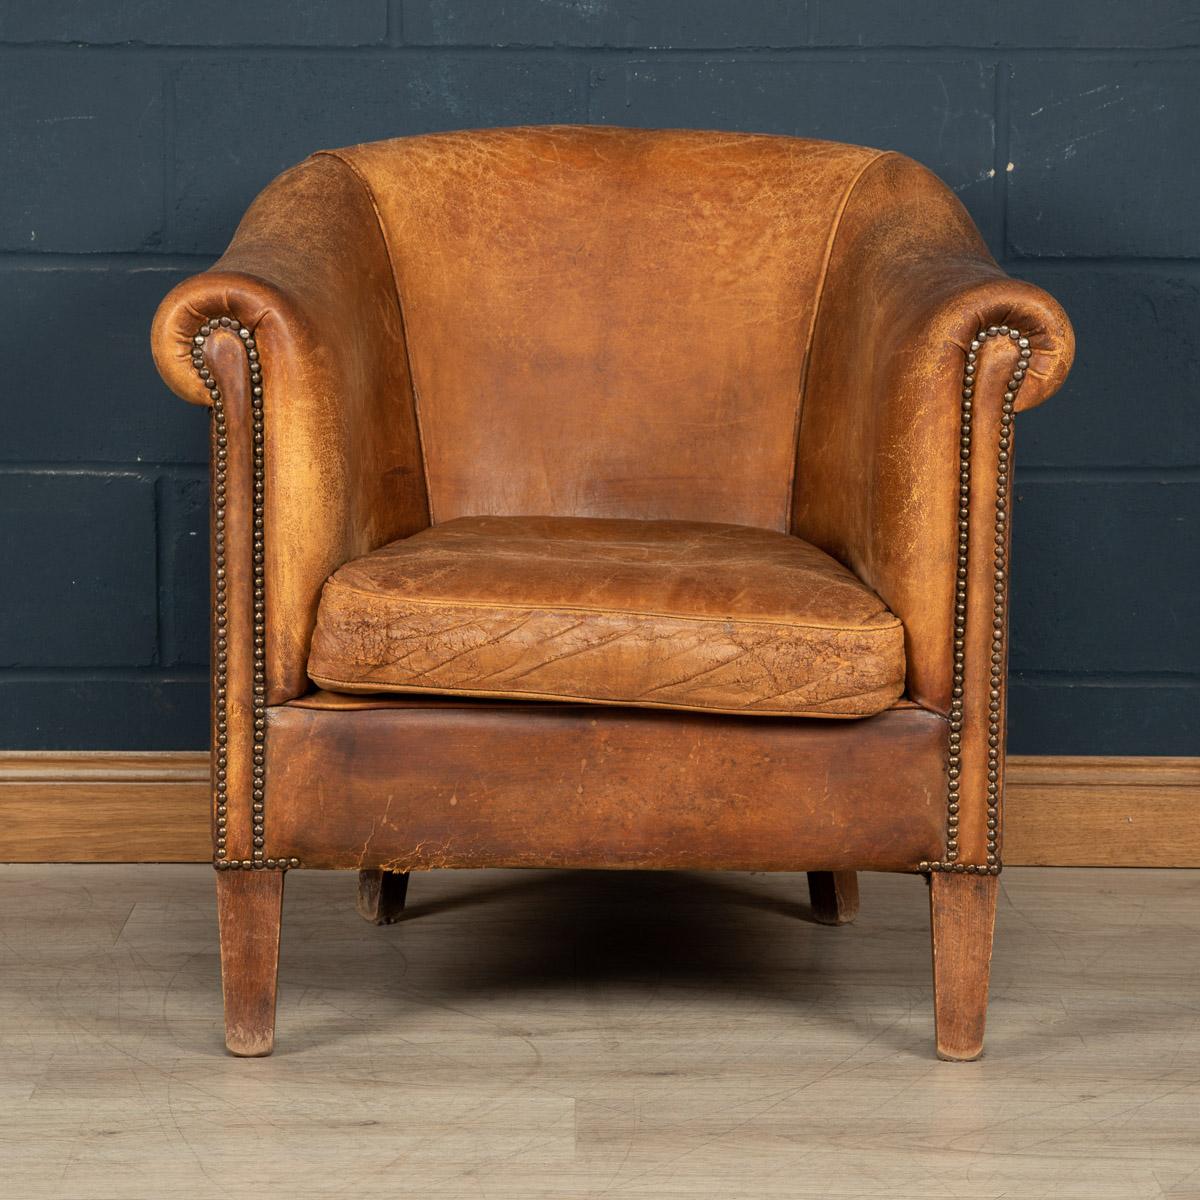 Showing superb patina and colour, this wonderful club chair was hand upholstered sheepskin leather in Holland by the finest craftsmen.

Condition
In Good Condition - some wear consistent with normal use, darkening to the armrests where the chair